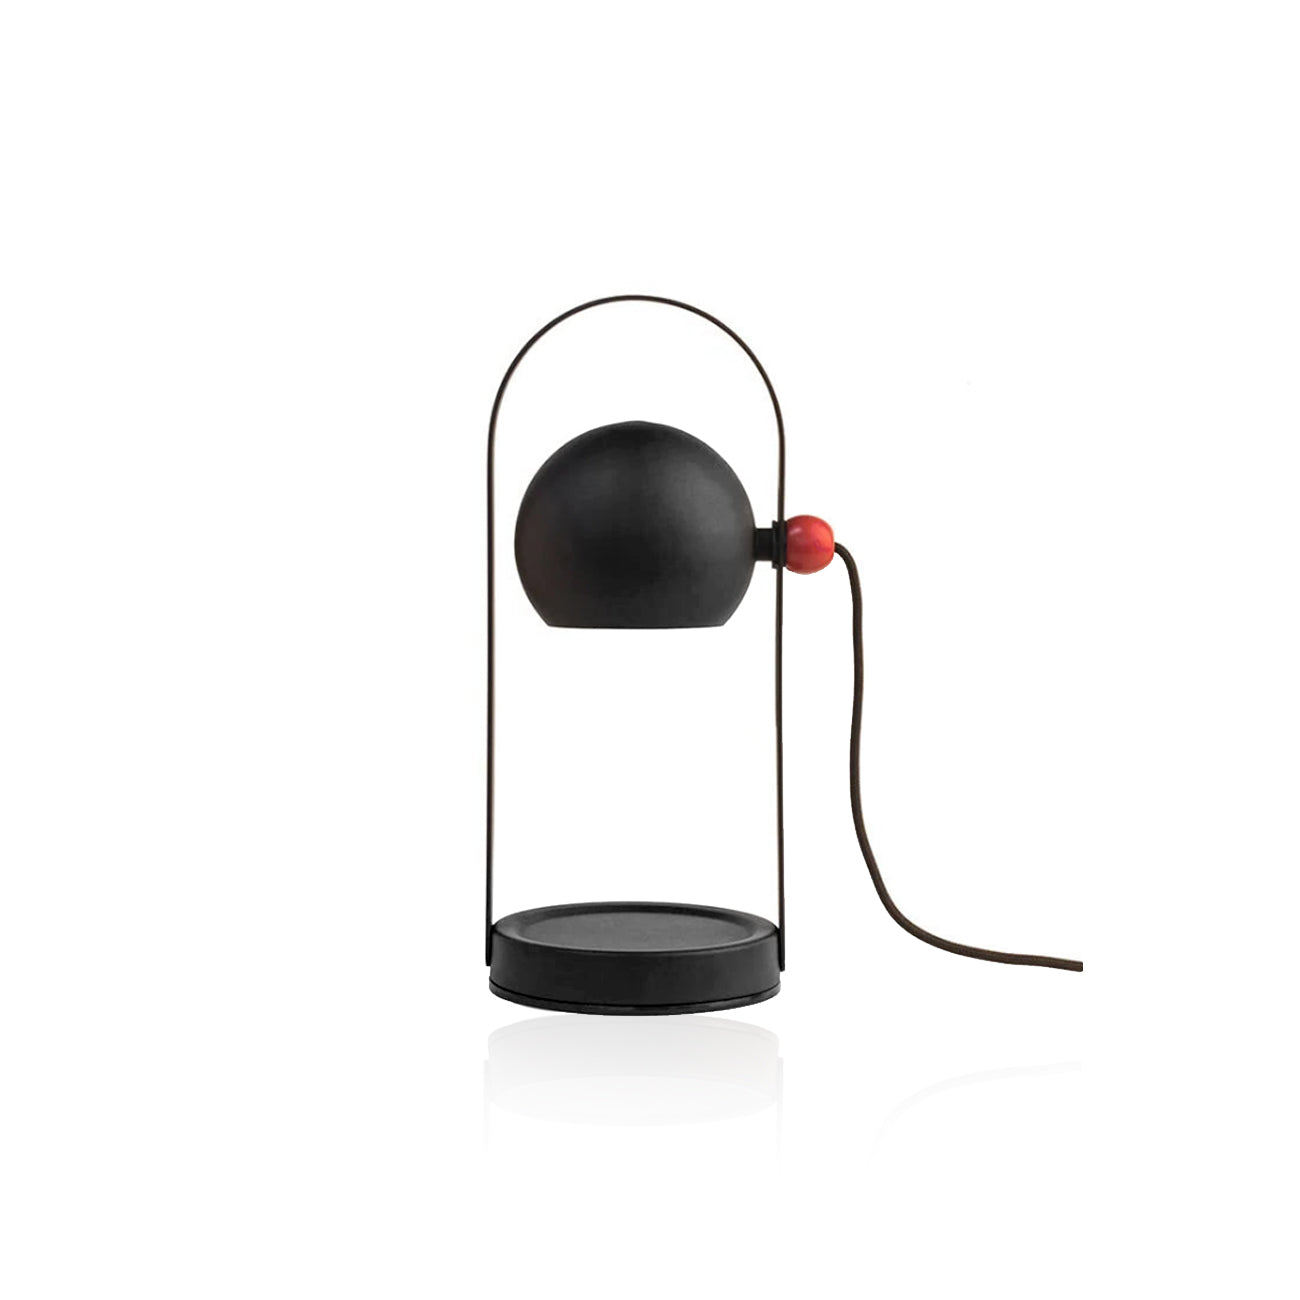 Modern Design Black Dimmable Candle Warmer